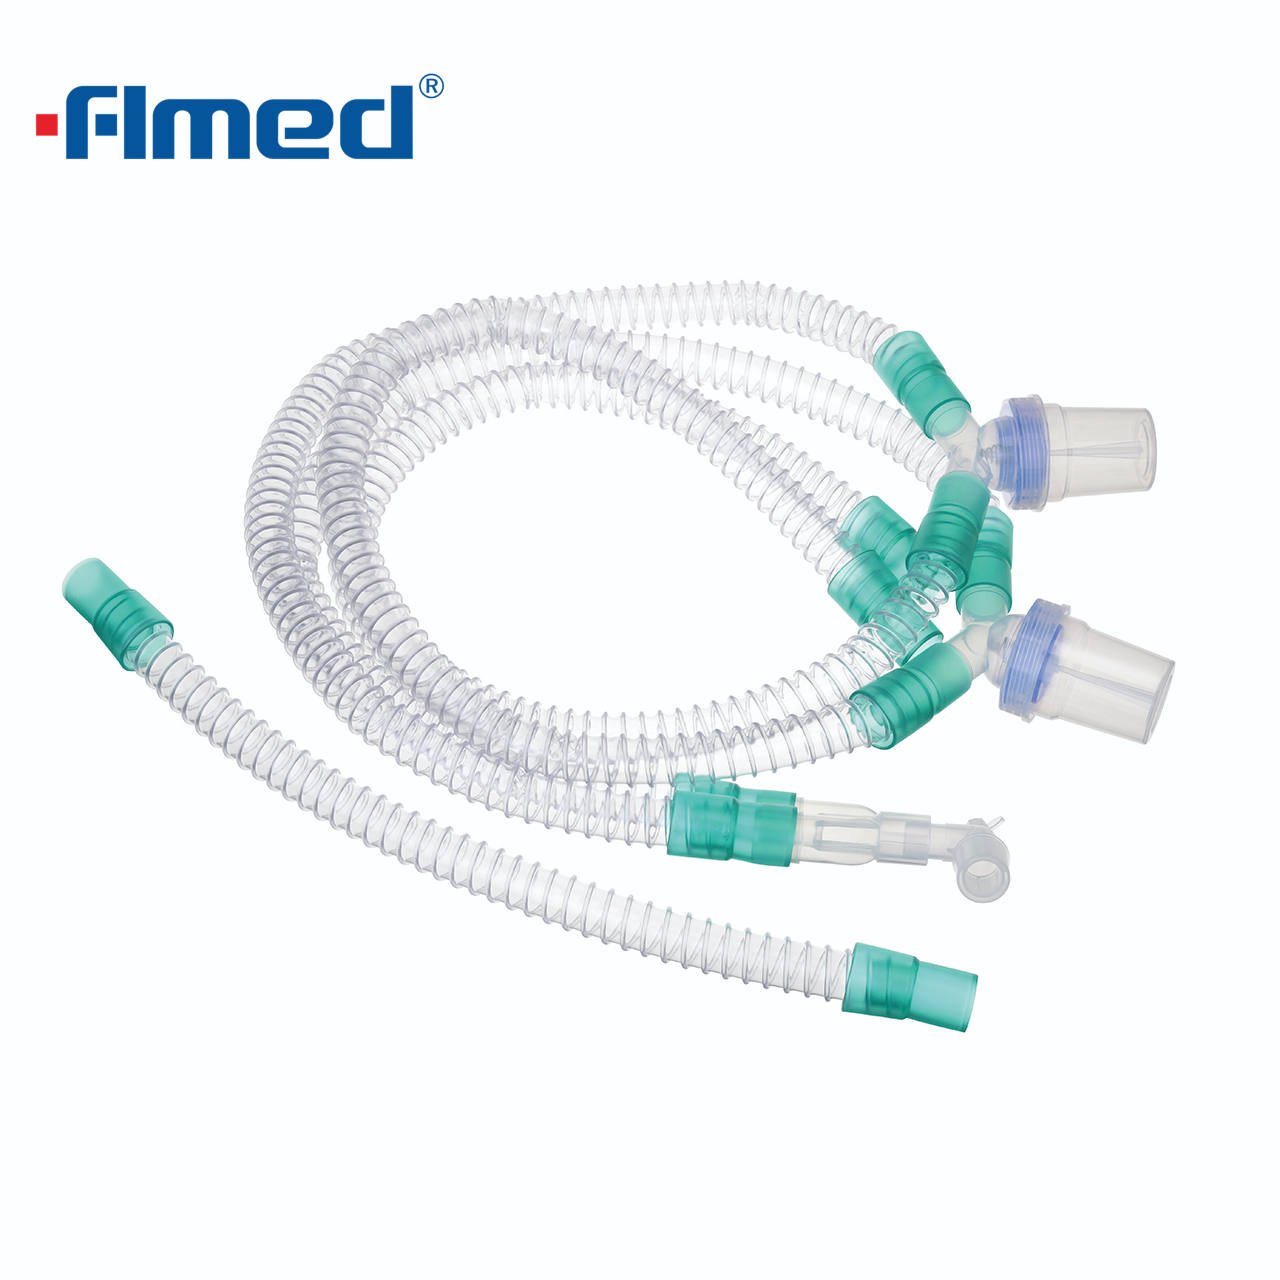 Adult Disposable Expandable Anesthesia Breathing Circuits